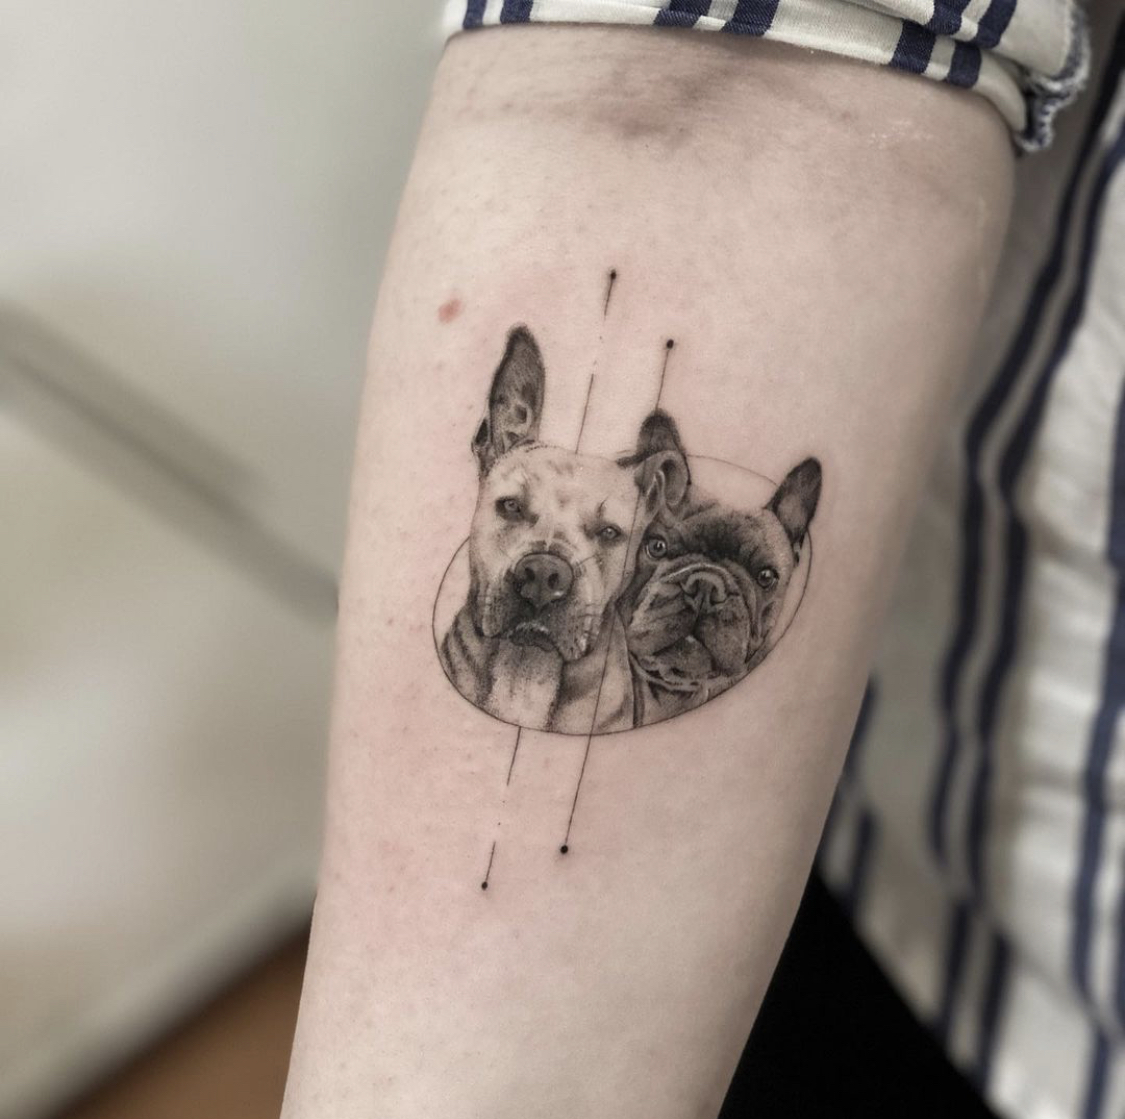 Tattoos with dog theme: We have the cutest net finds for you - dogbible